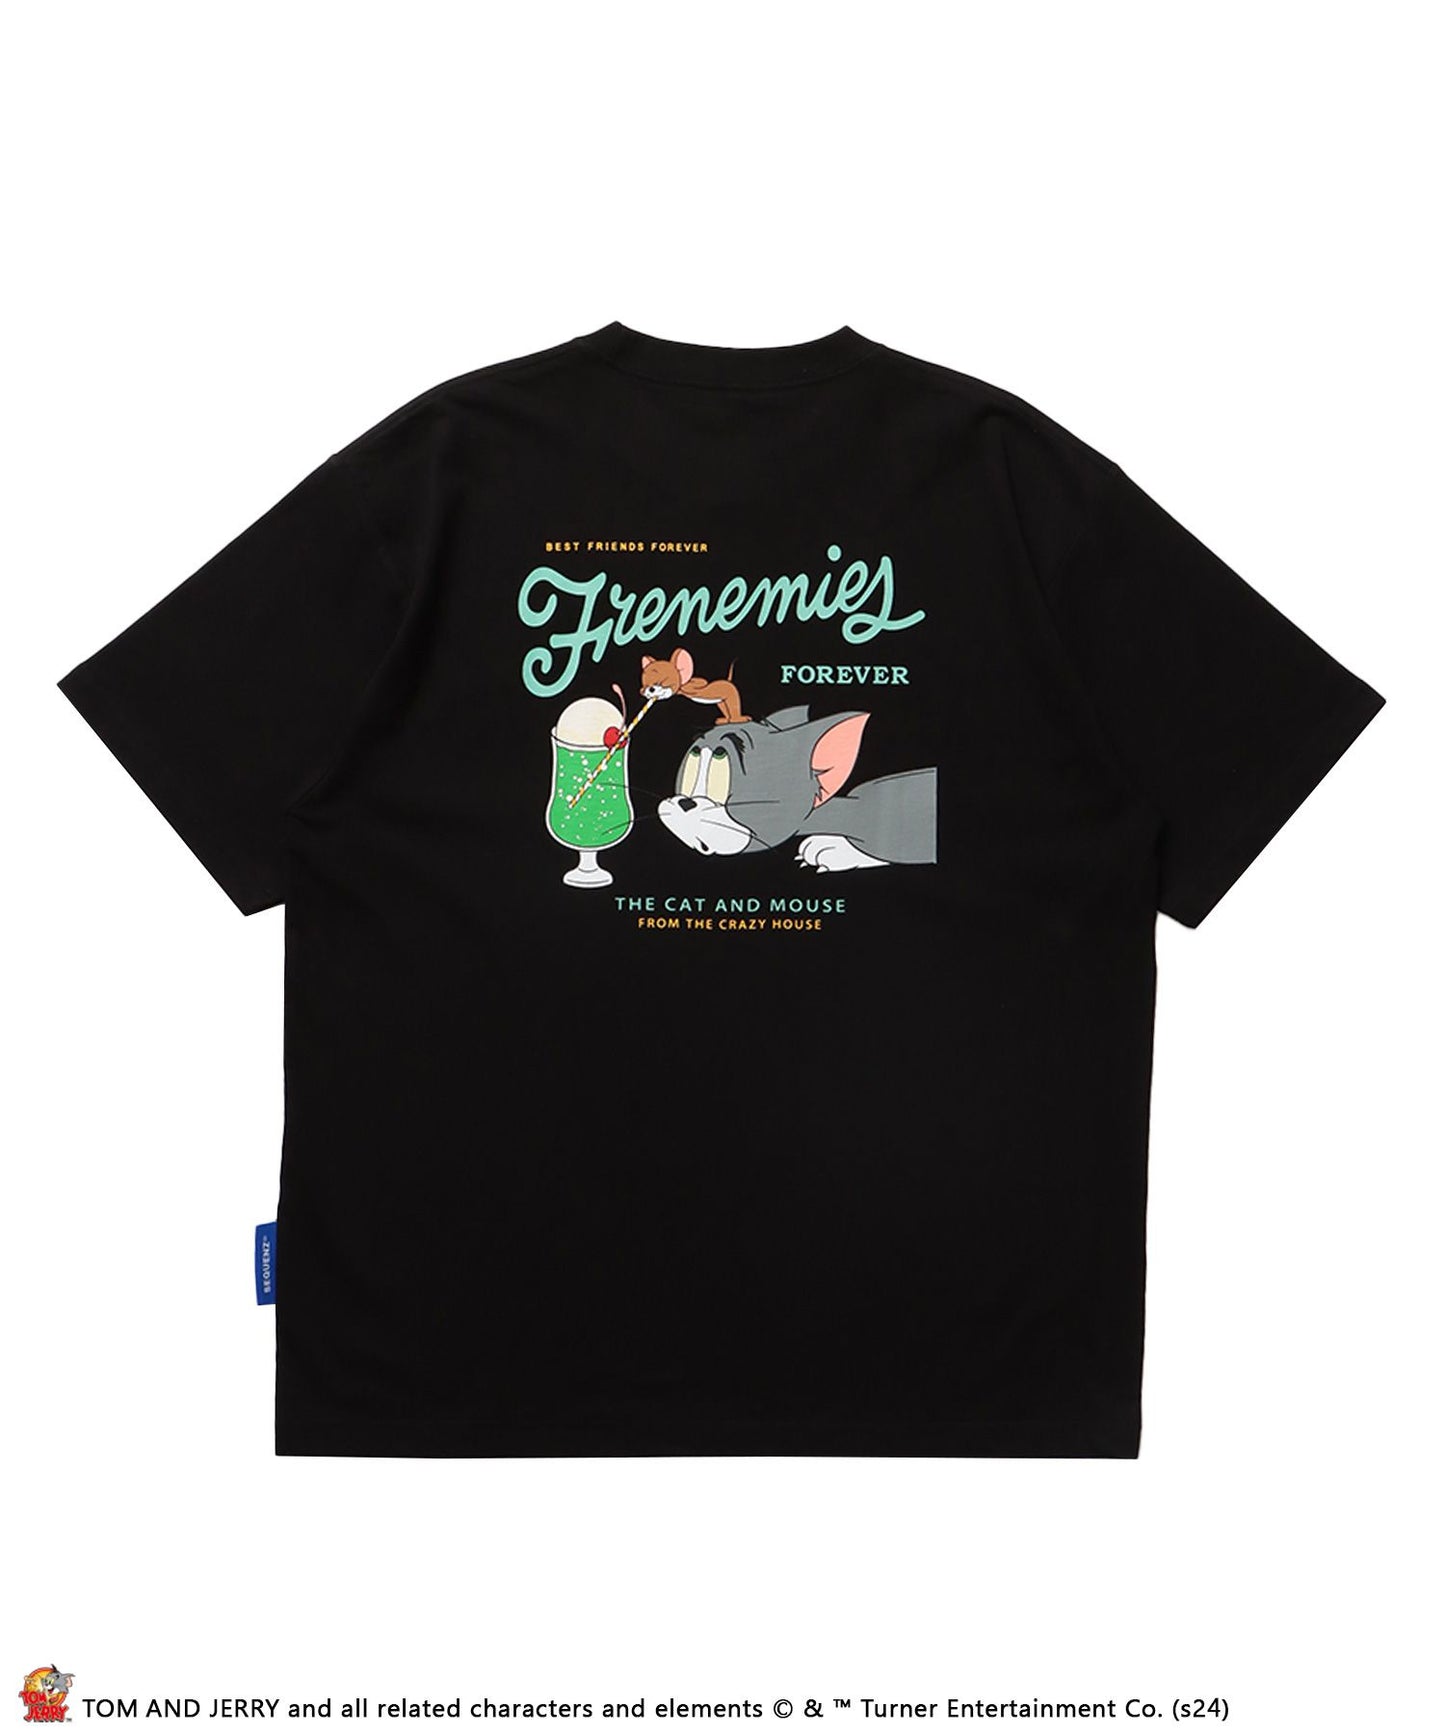 【SEQUENZ（シークエンズ）】TJ SANDWICH SHOP S/S TEE / TOM and JERRY トムジェリ アメリカンダイナー Tシャツ レトロ クリームソーダ プリント 半袖 ブラック